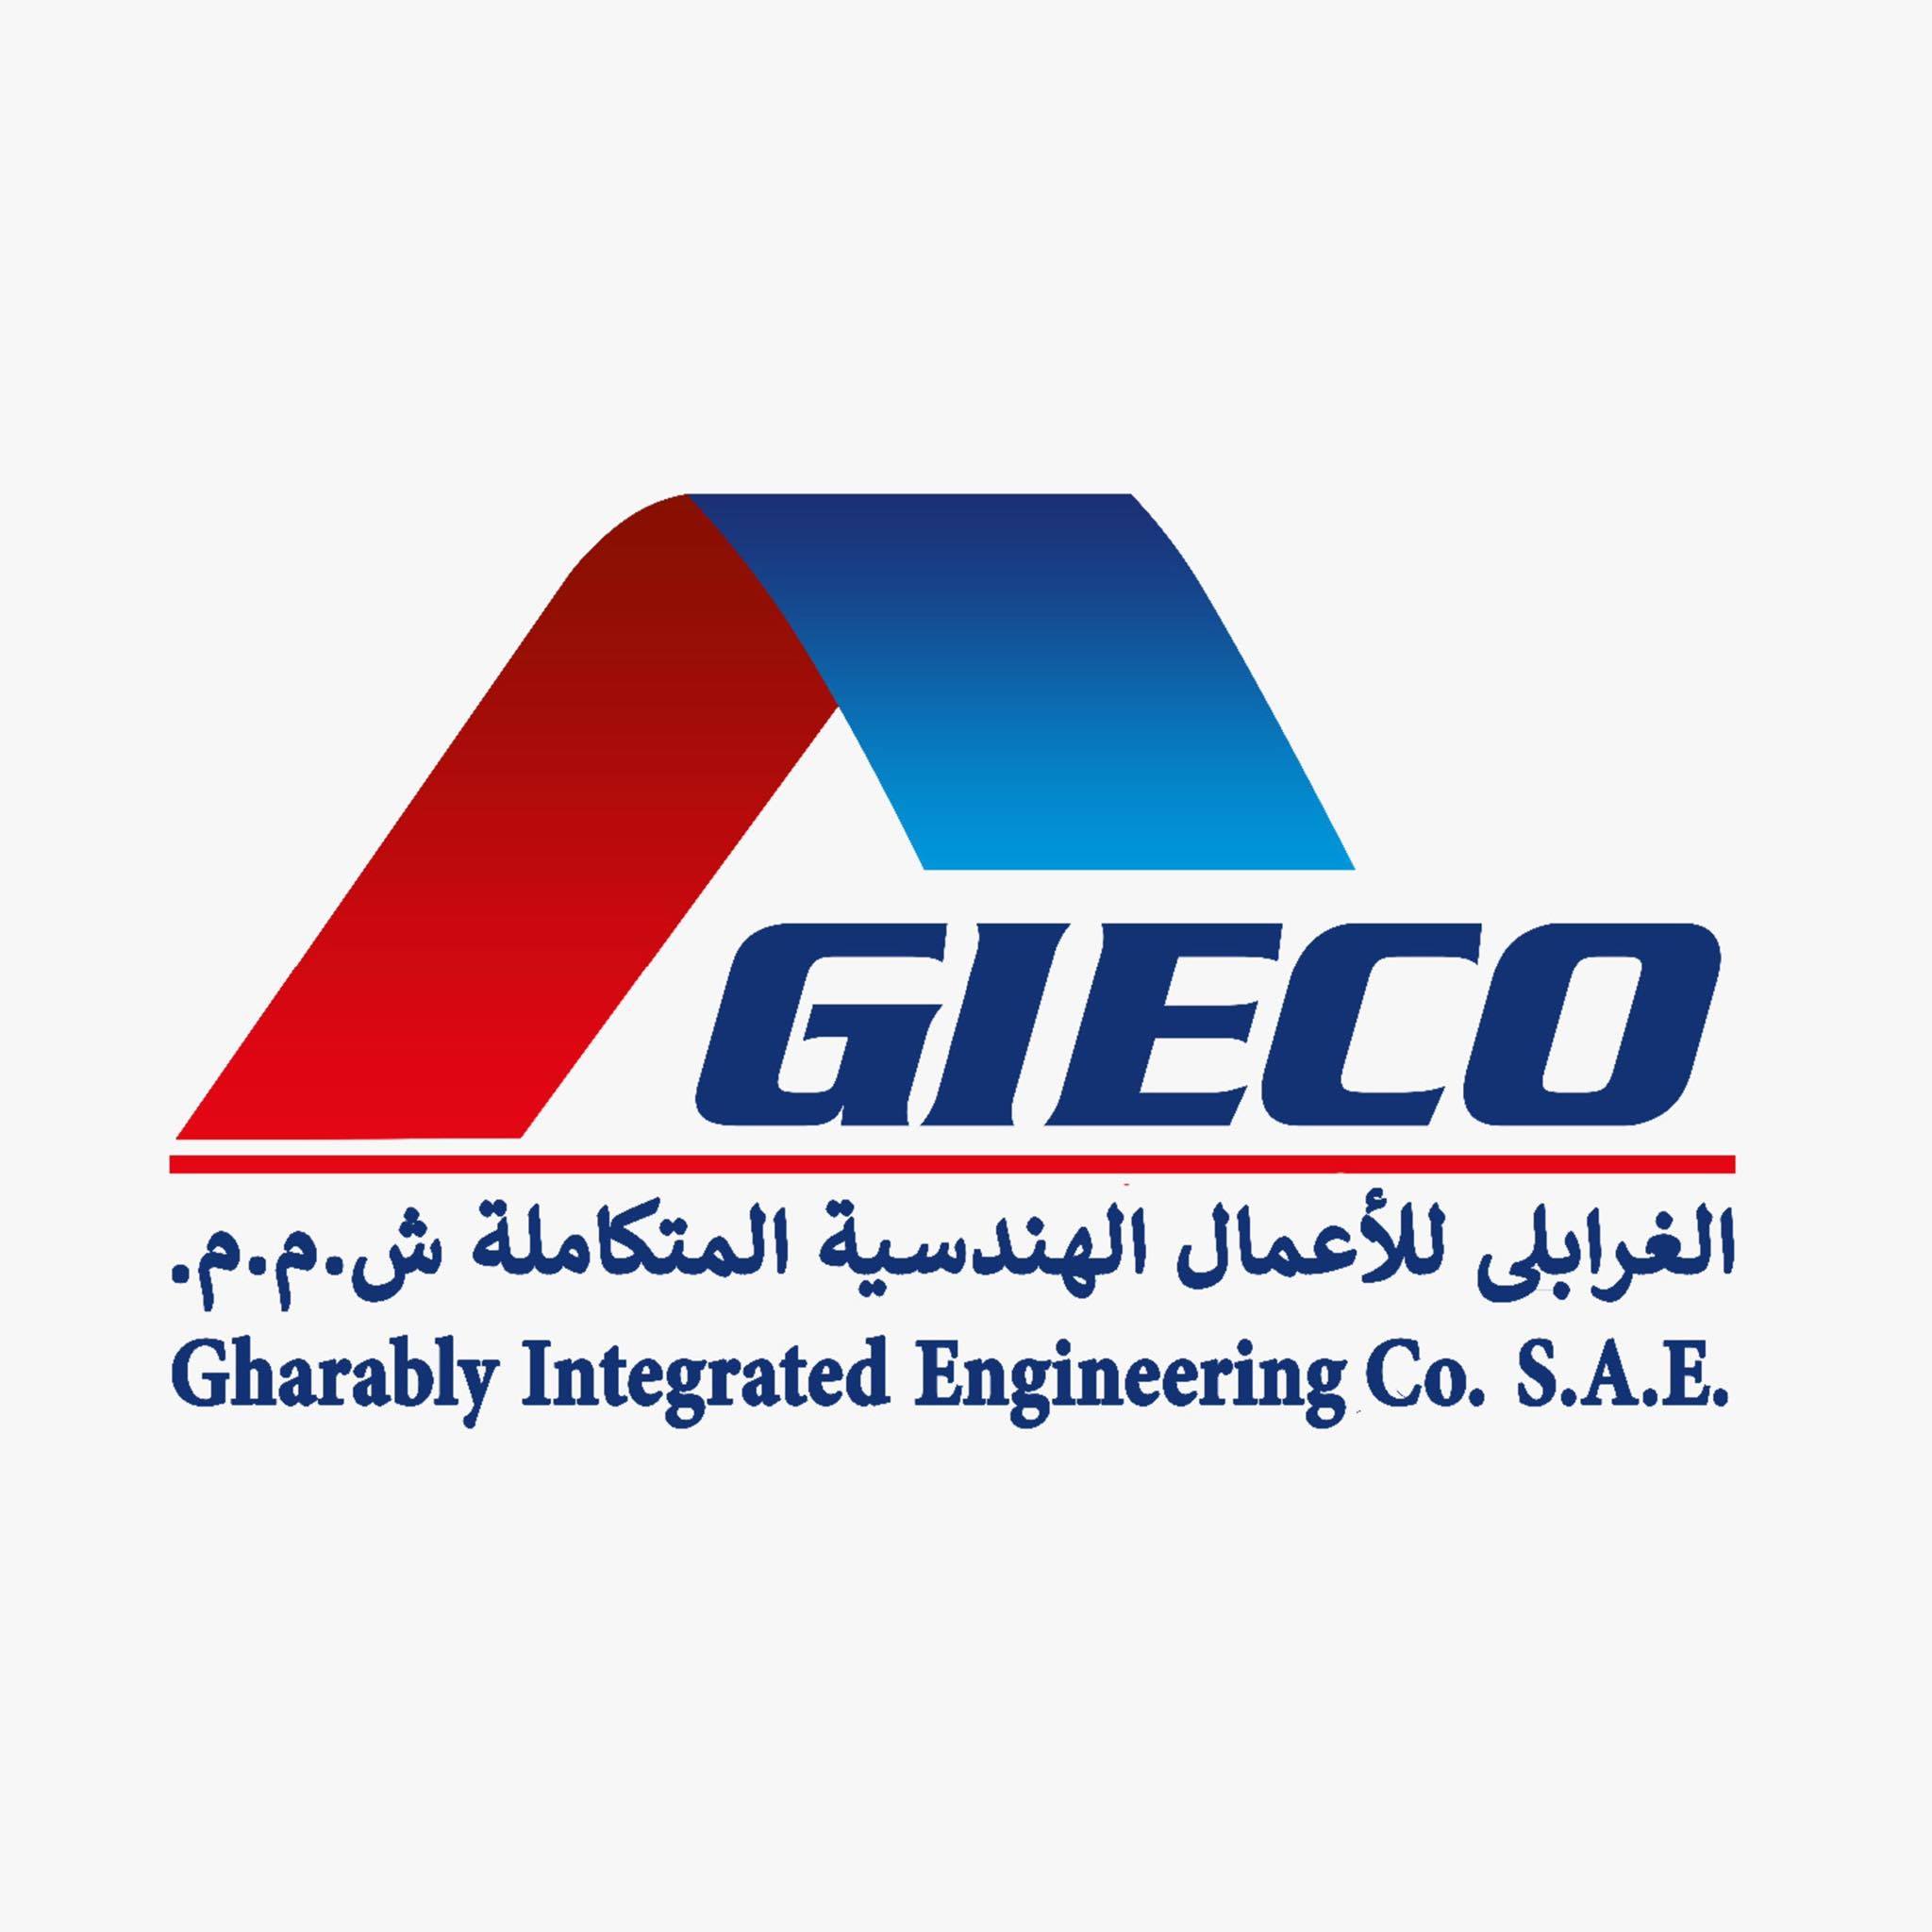 Gharably Integrated Engineering Company